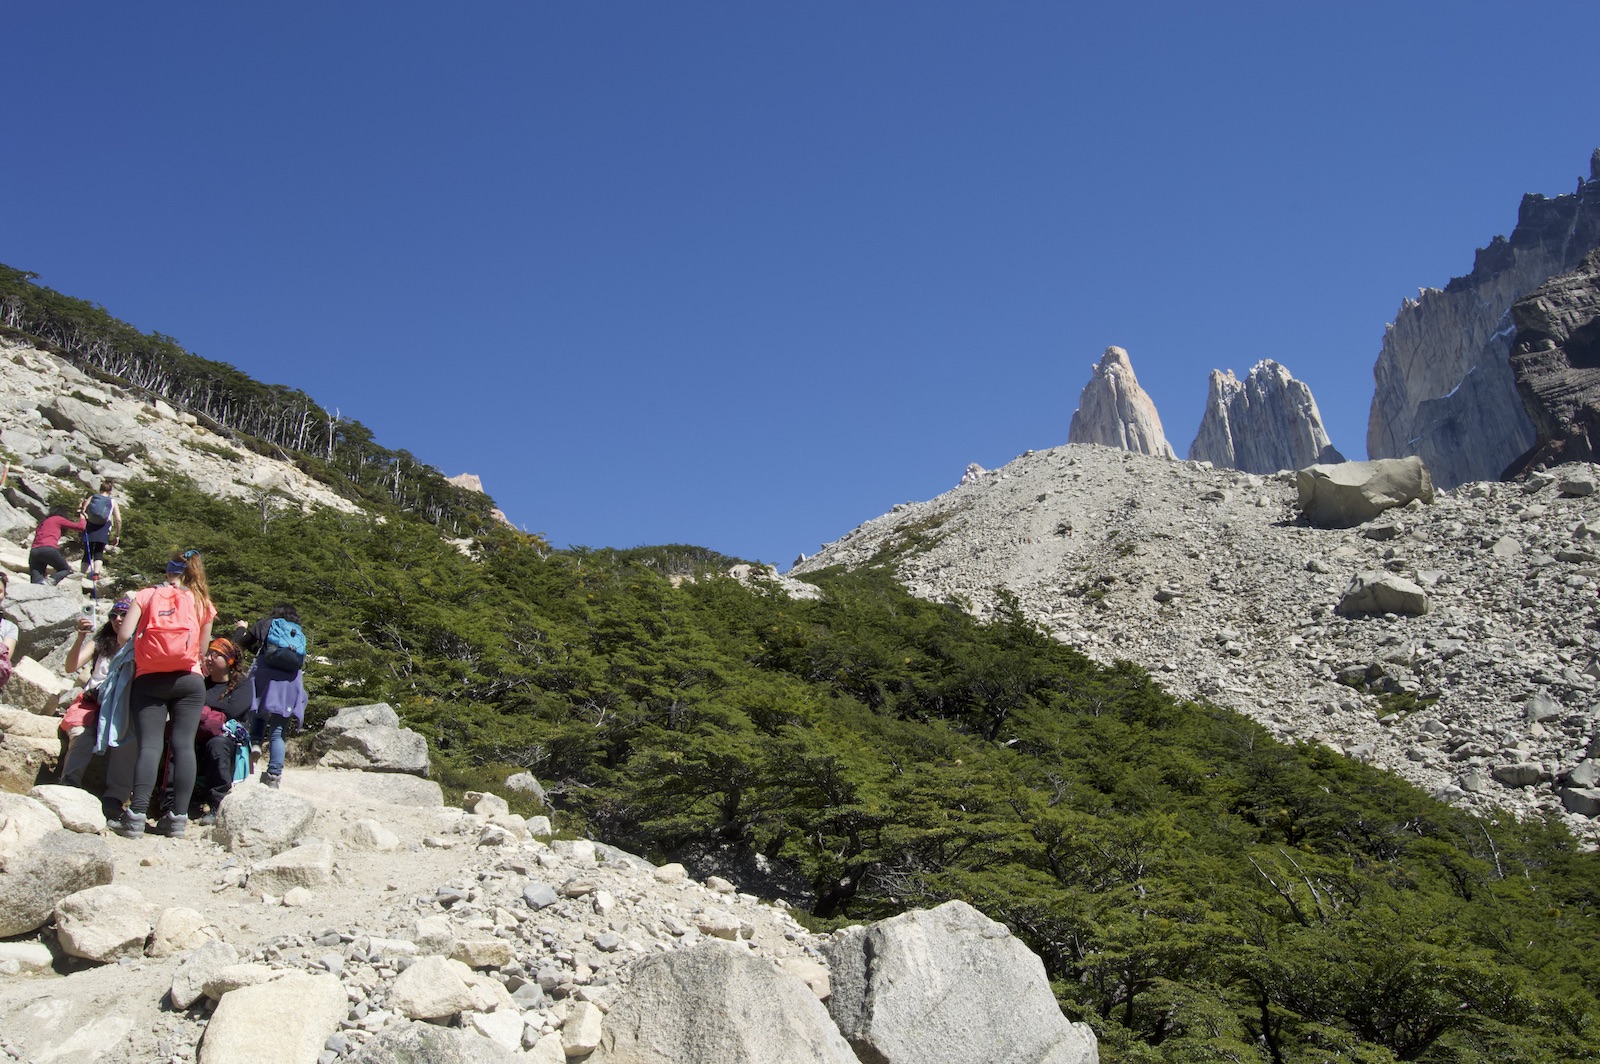 Hikers leading up the final ascent to the Torres on the Mirador Las Torres hike in February in Patagonia